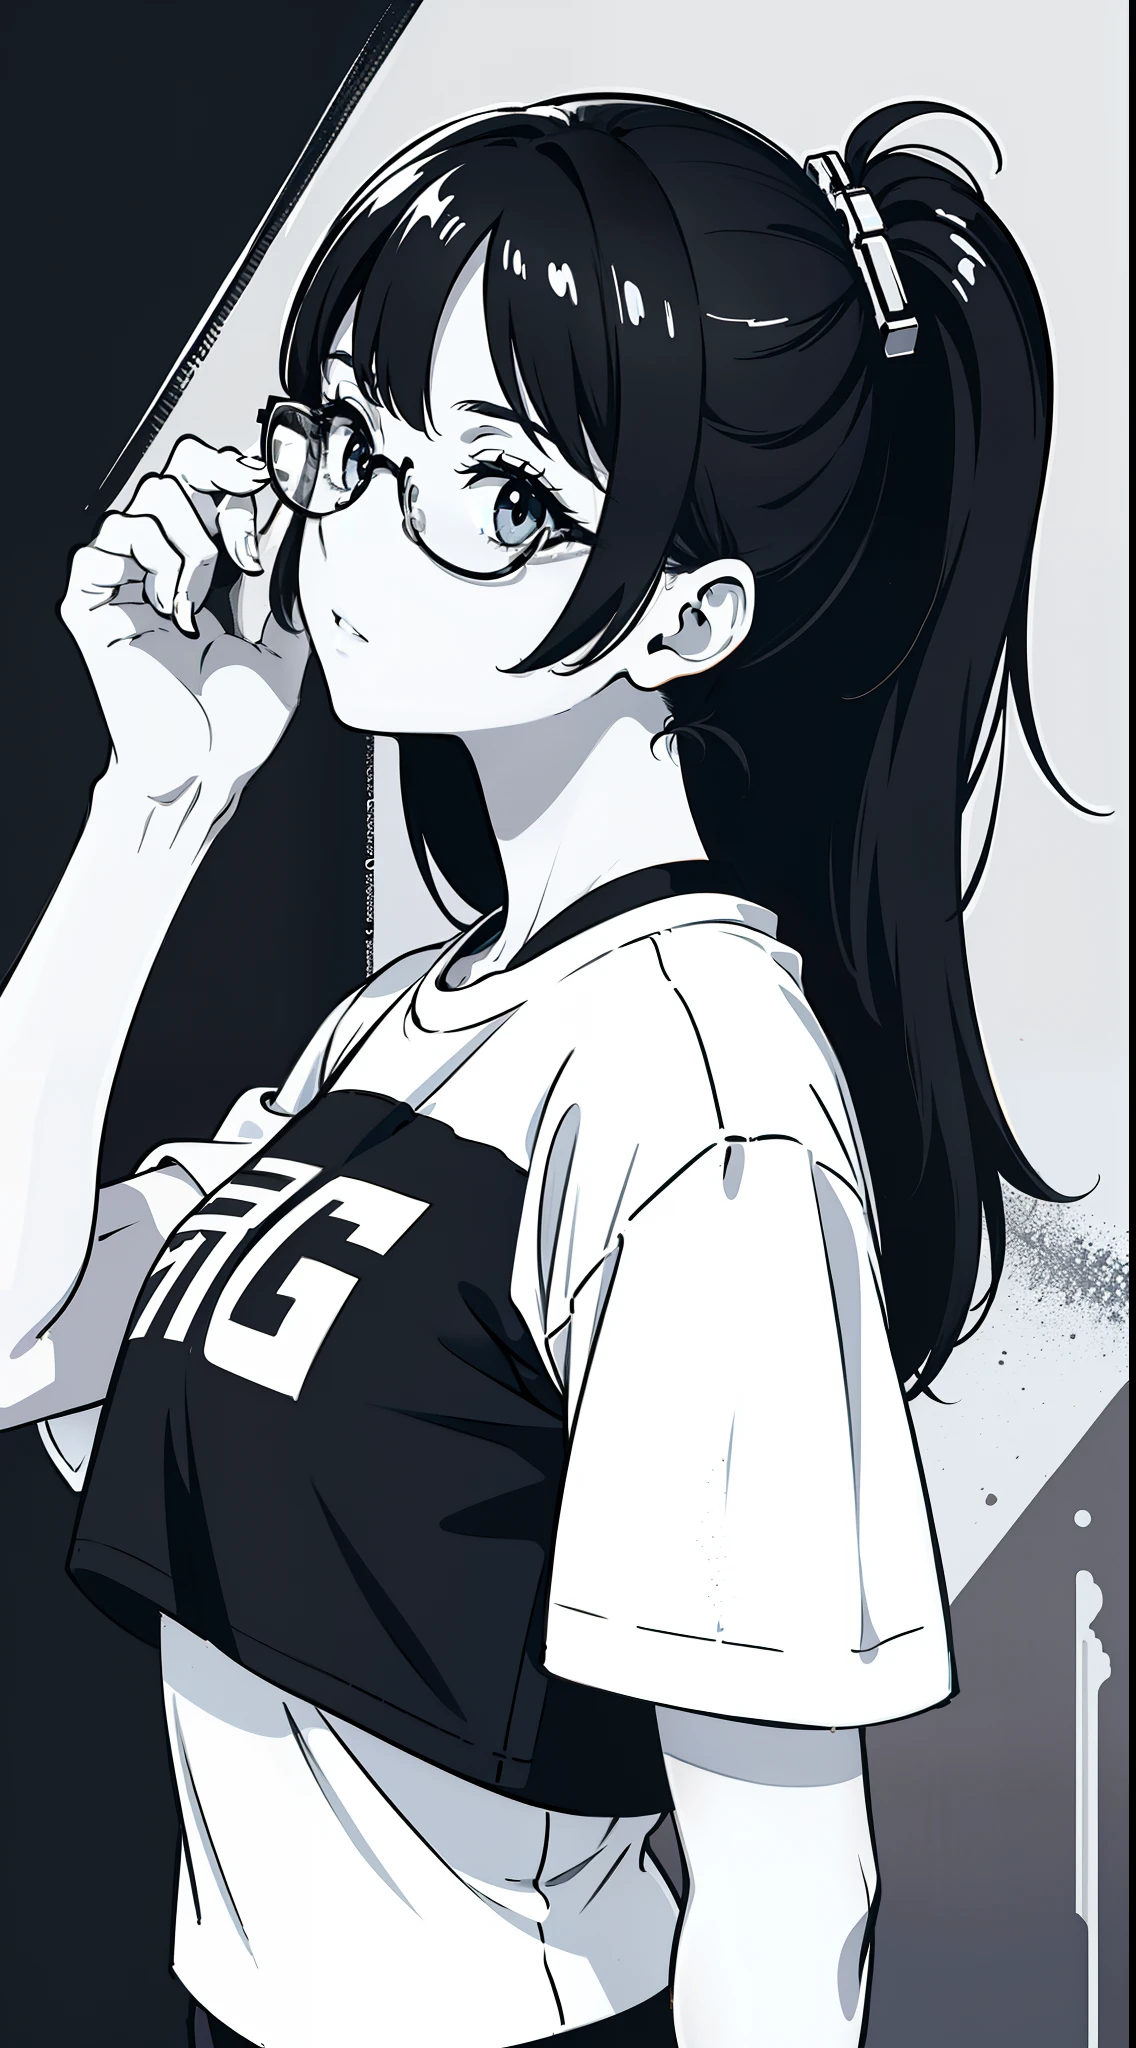 girl, side portrait, black and white, messy short hair, edgy accessories,sporty style, casual t-shirt, confident gaze, monochrome color scheme, looking to the side, chic street fashion,((a person)),Luxurious long hair,Round eyeglass frames, circular lens shape